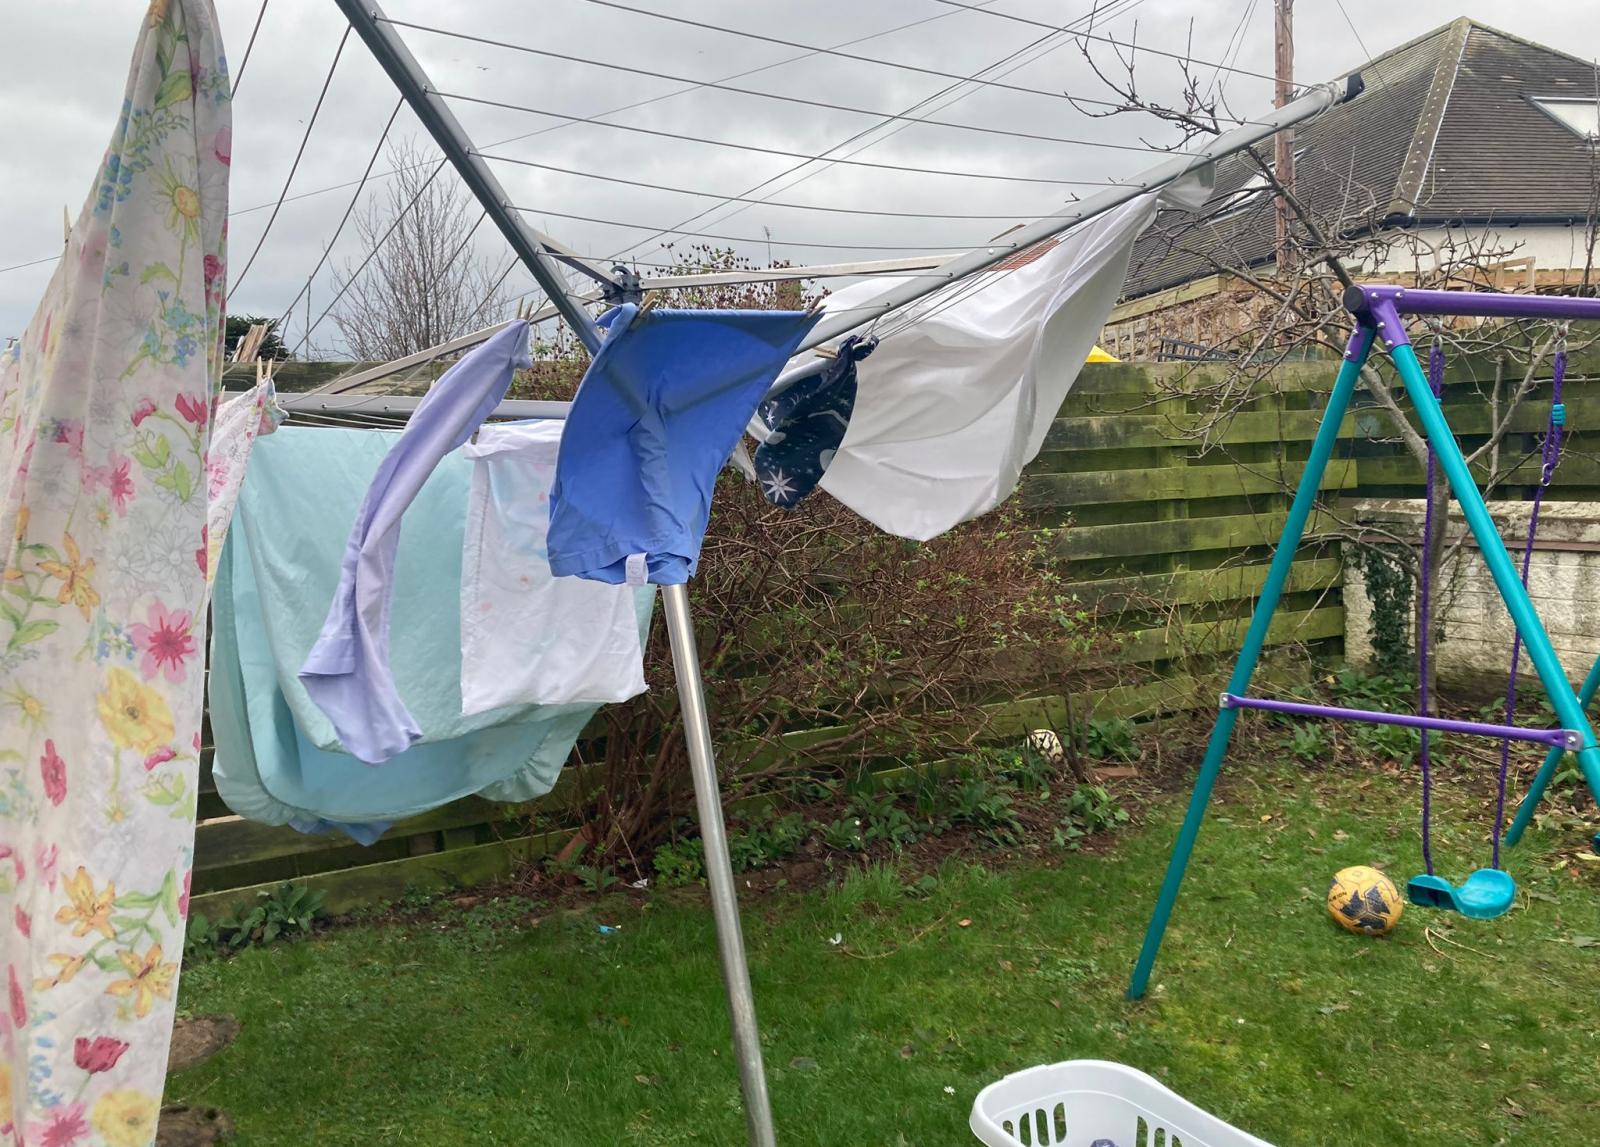 Putting the washing out on the line, even in the winter months